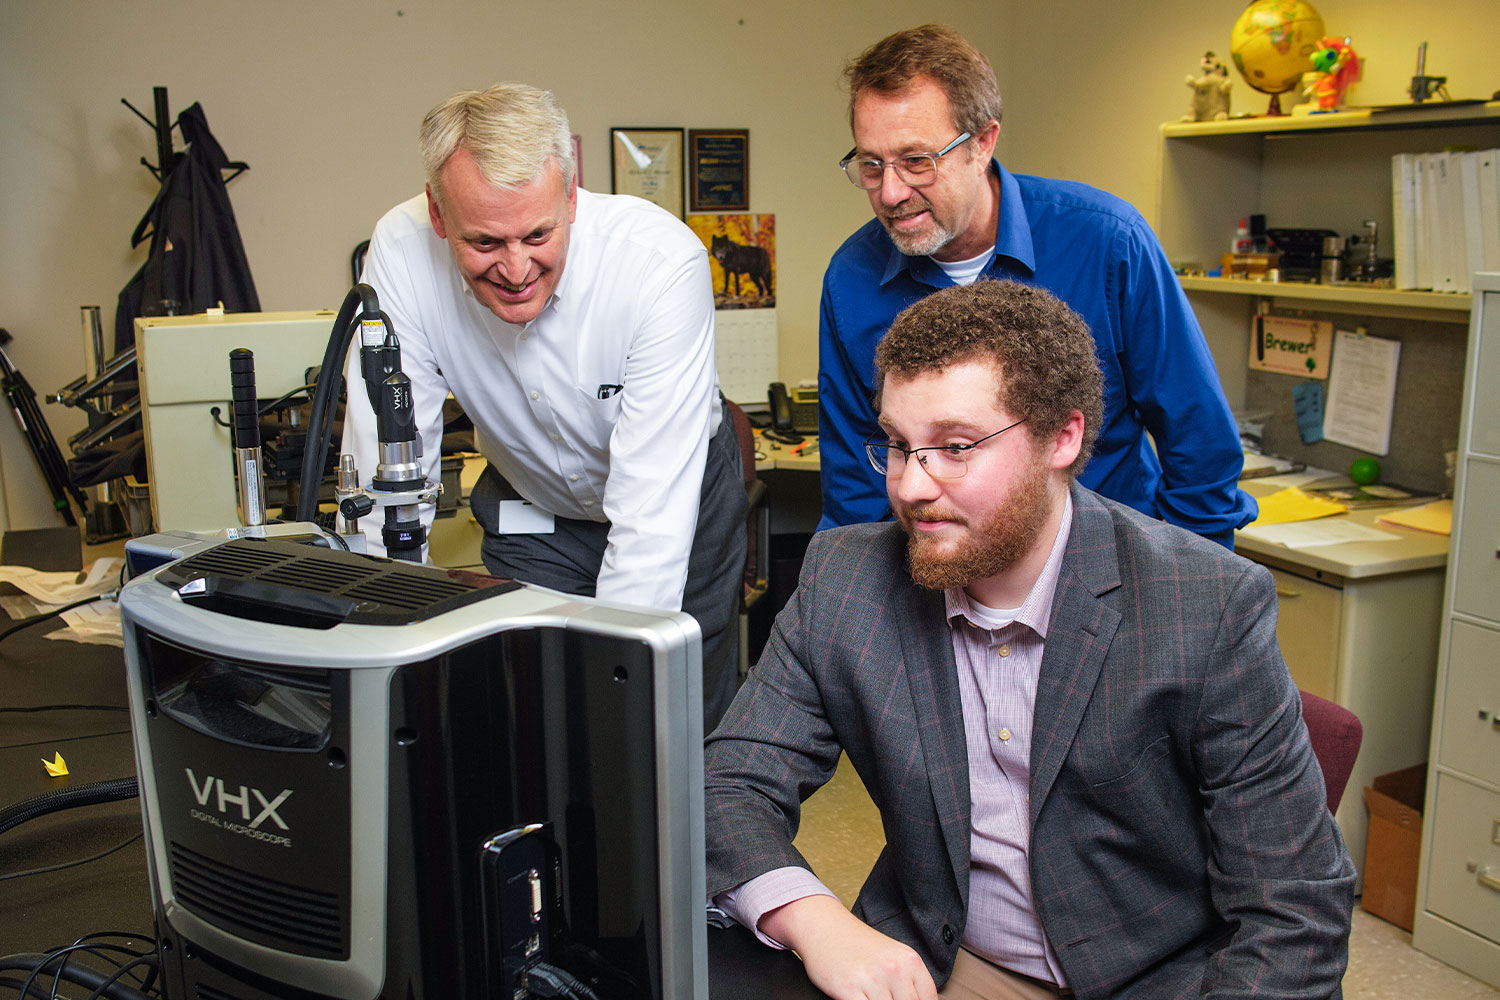 Researchers from UT and ARC work on Microscope